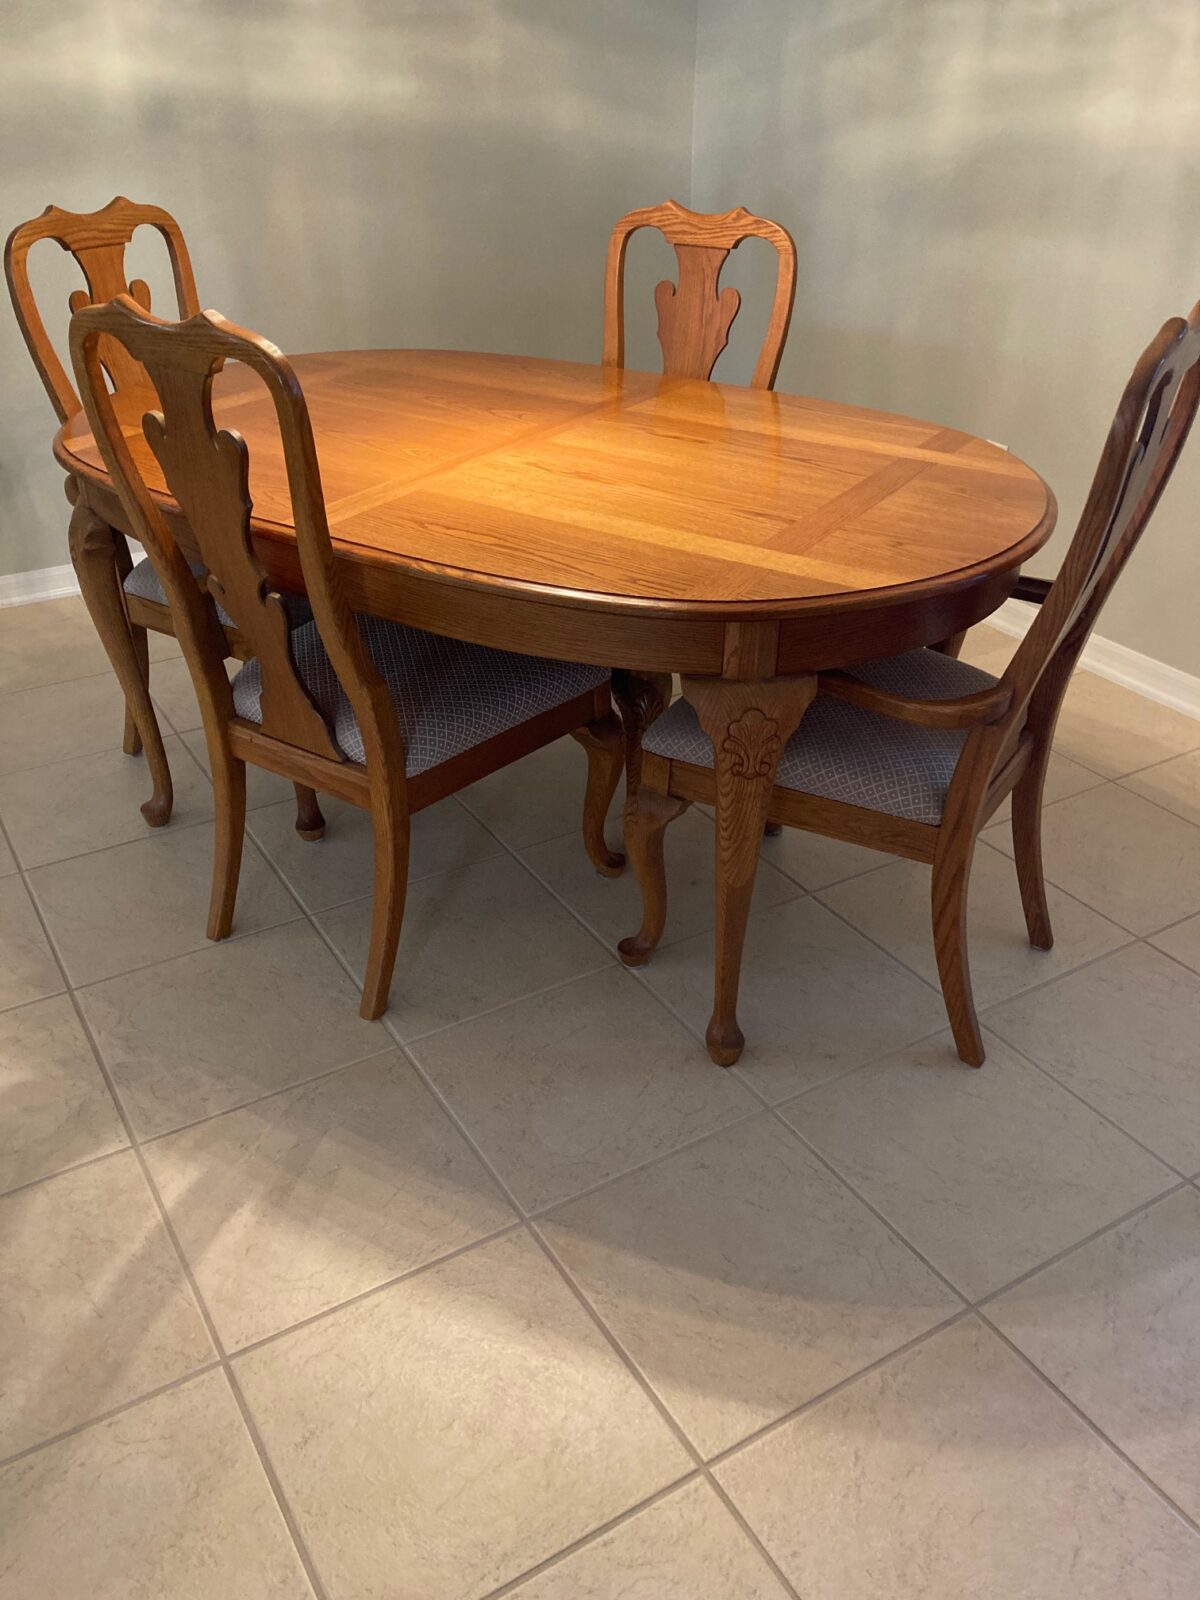 Dining Room Table w/ Chairs | Villages-News.com | Classifieds